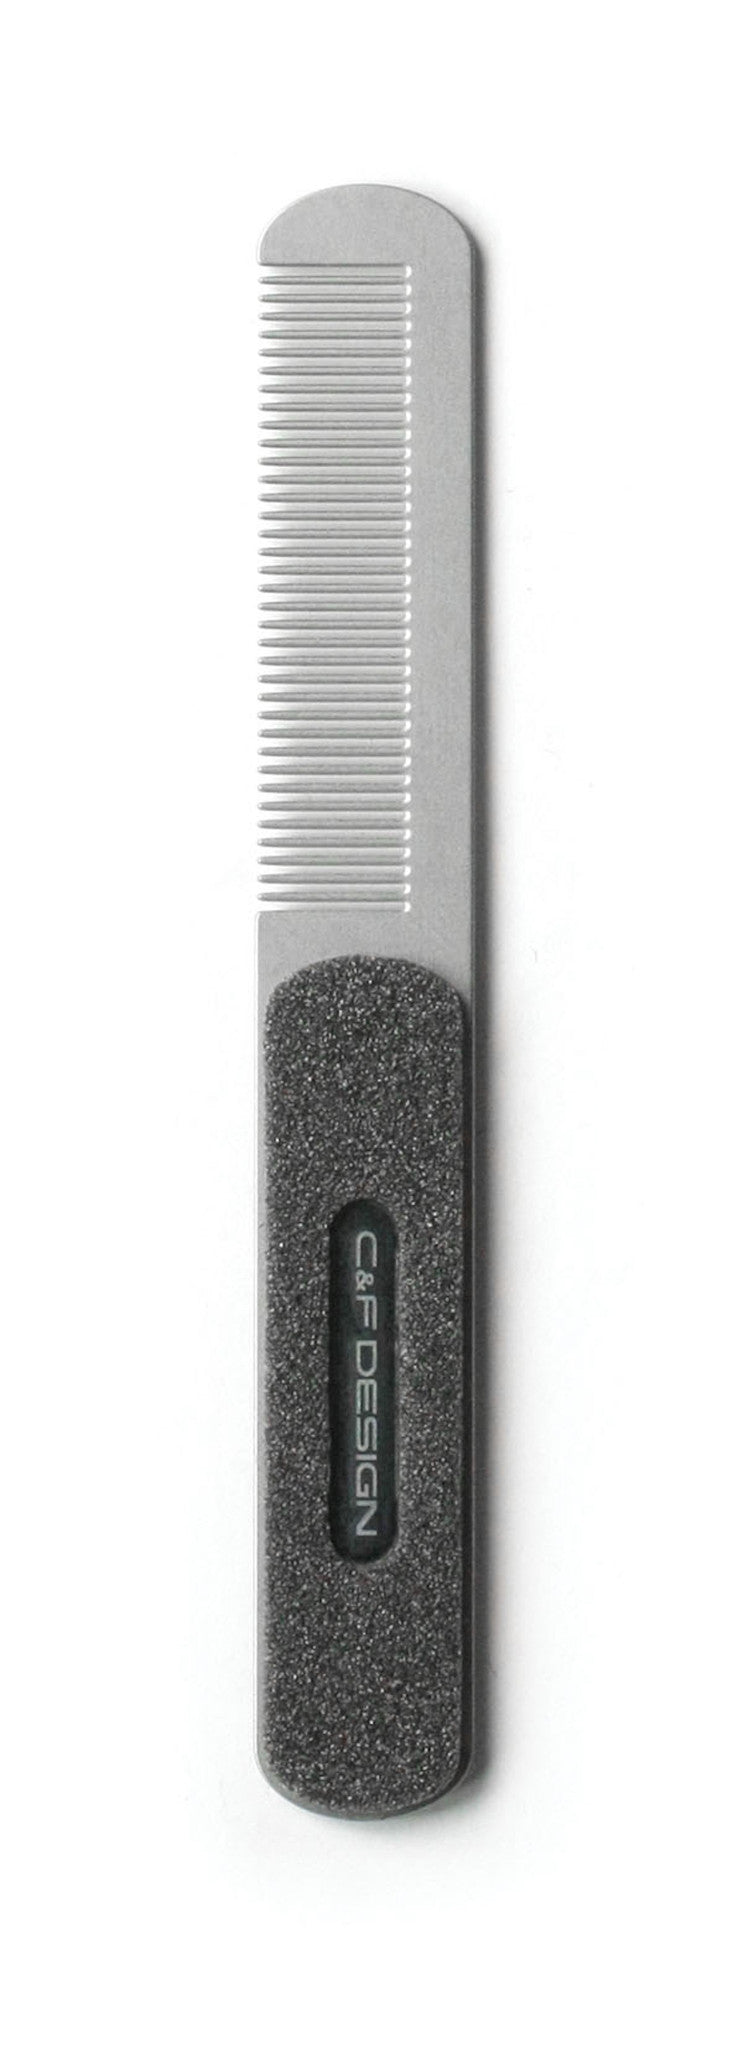 C&F Stainless Tying Comb